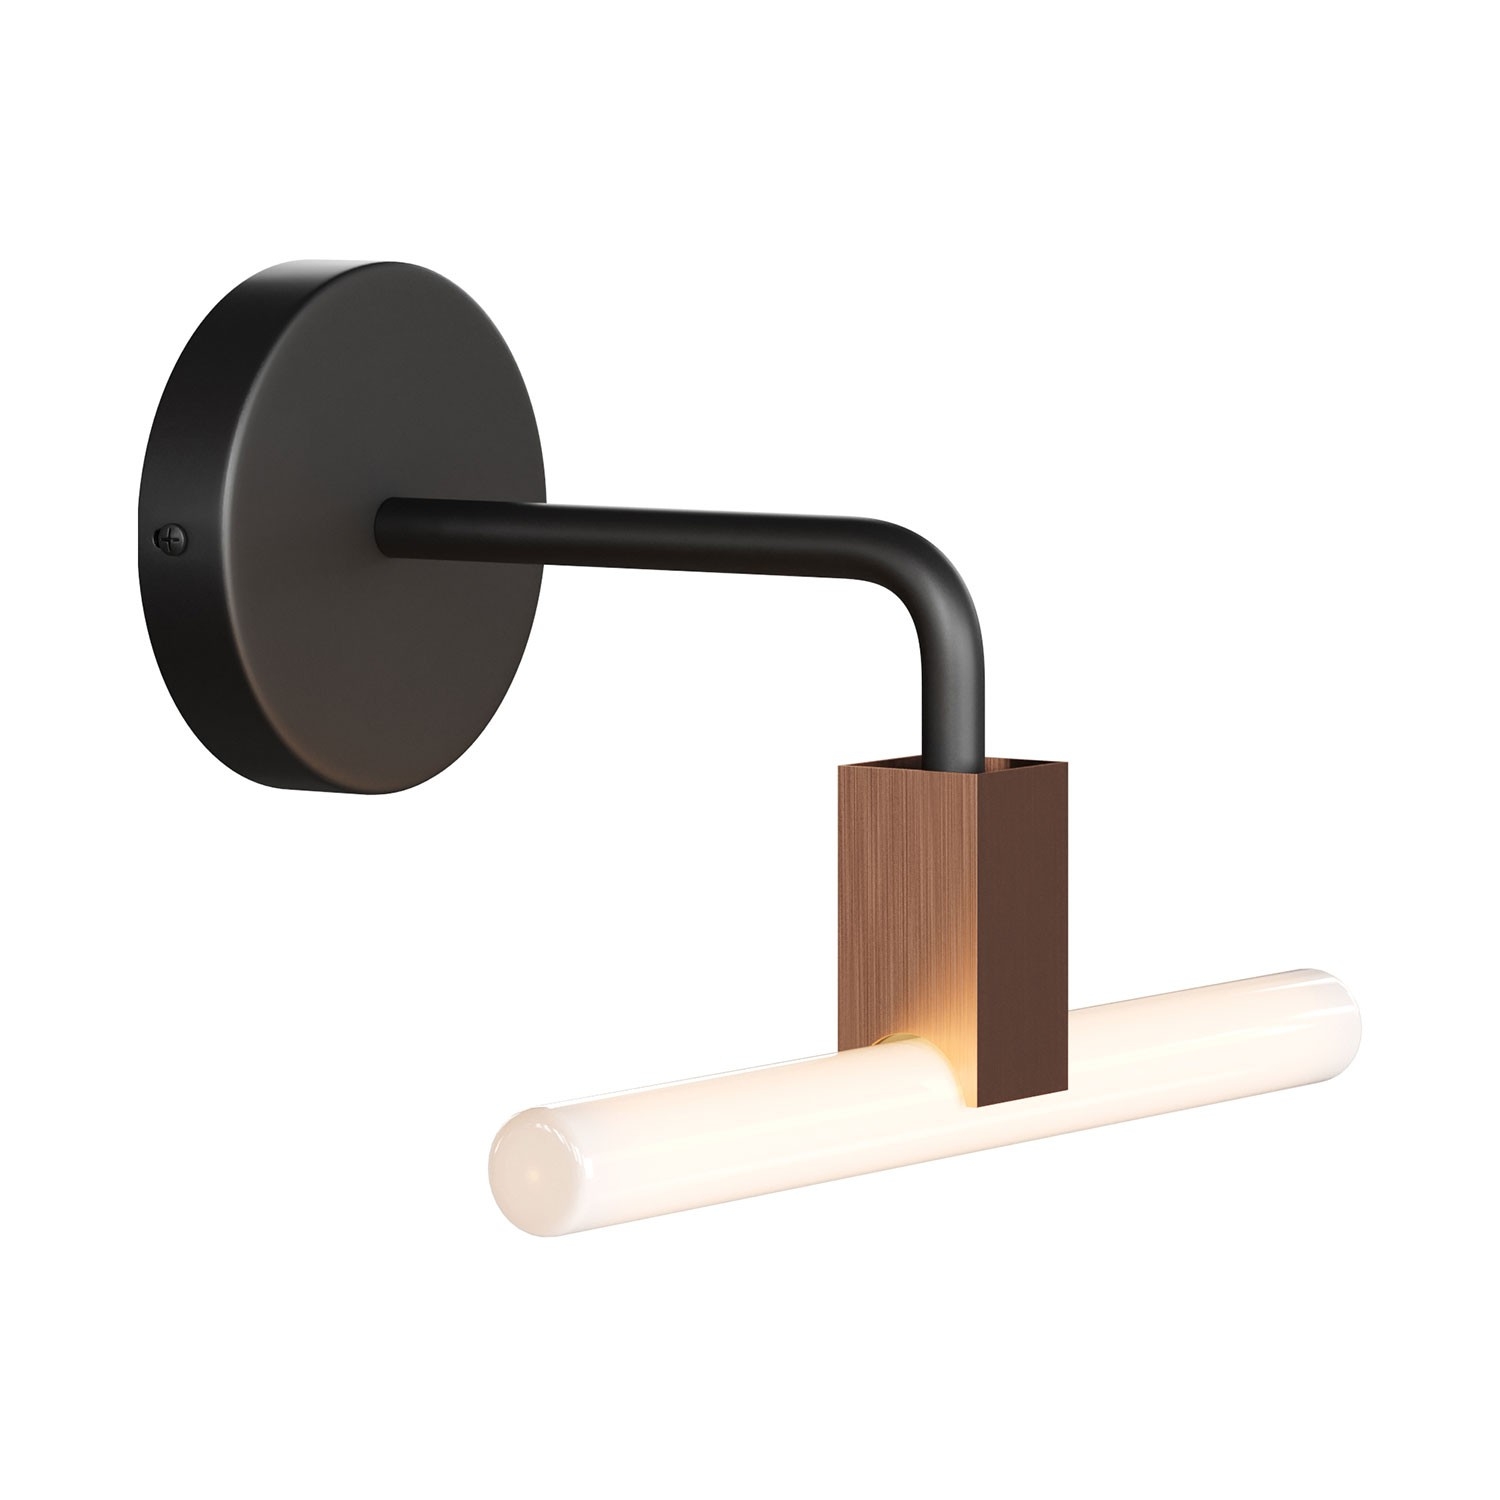 Architectural linear tube wall light with S14d Syntax socket & metal black bend extension pipe